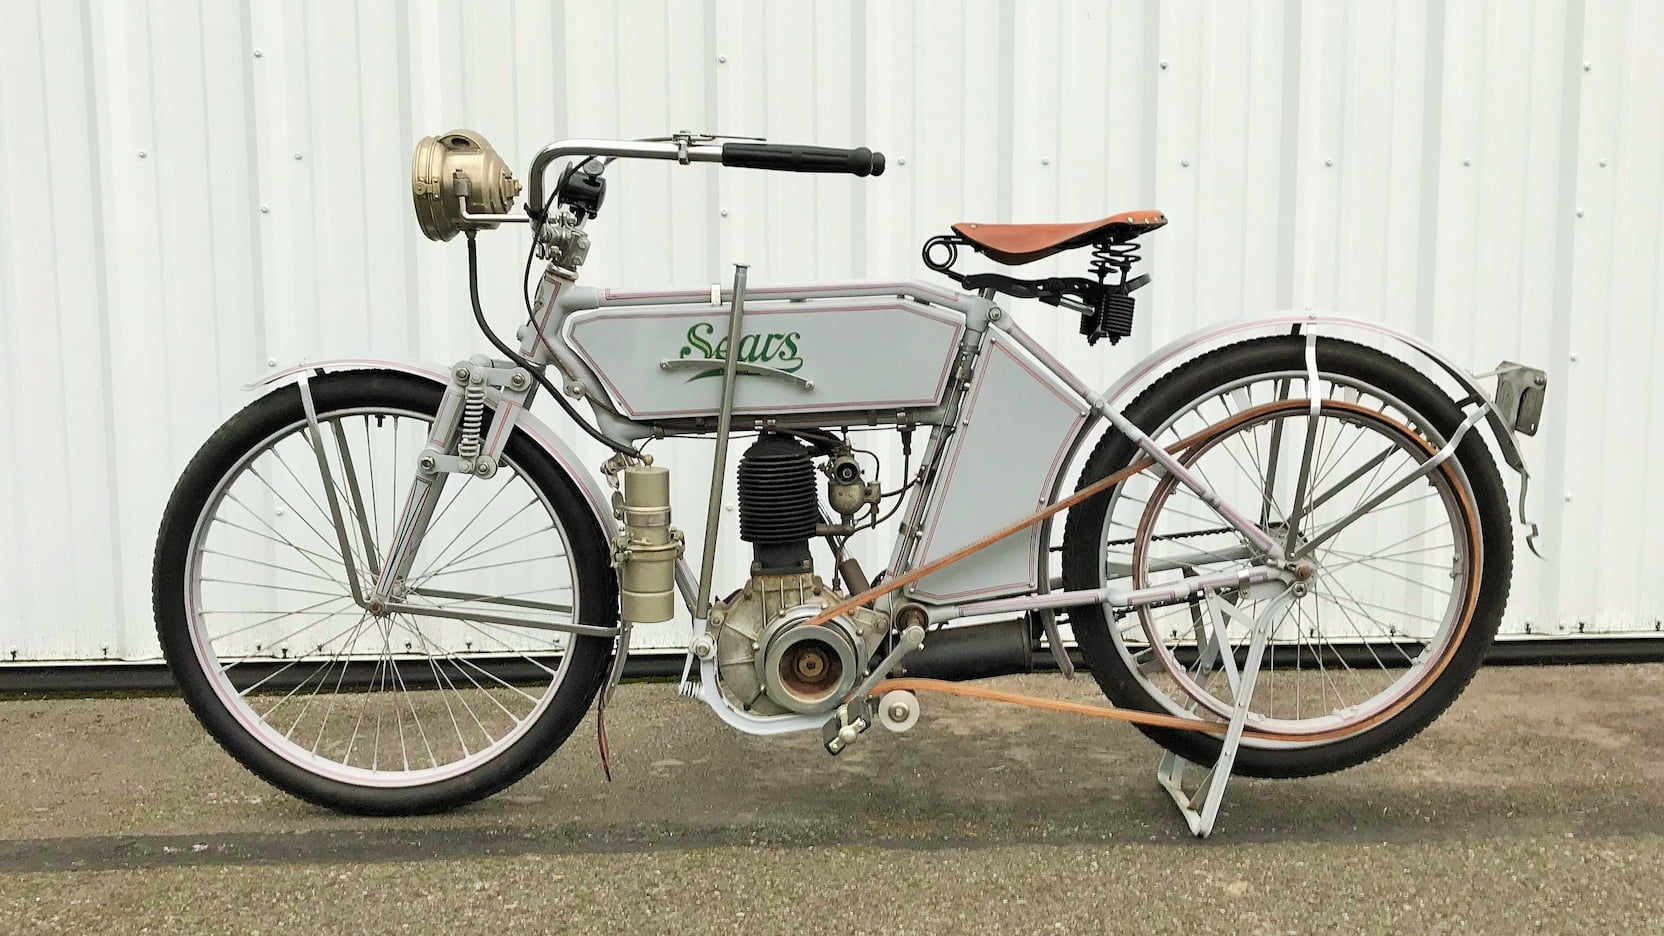 19r202 Sears Auto-Cycle  Motorcycle